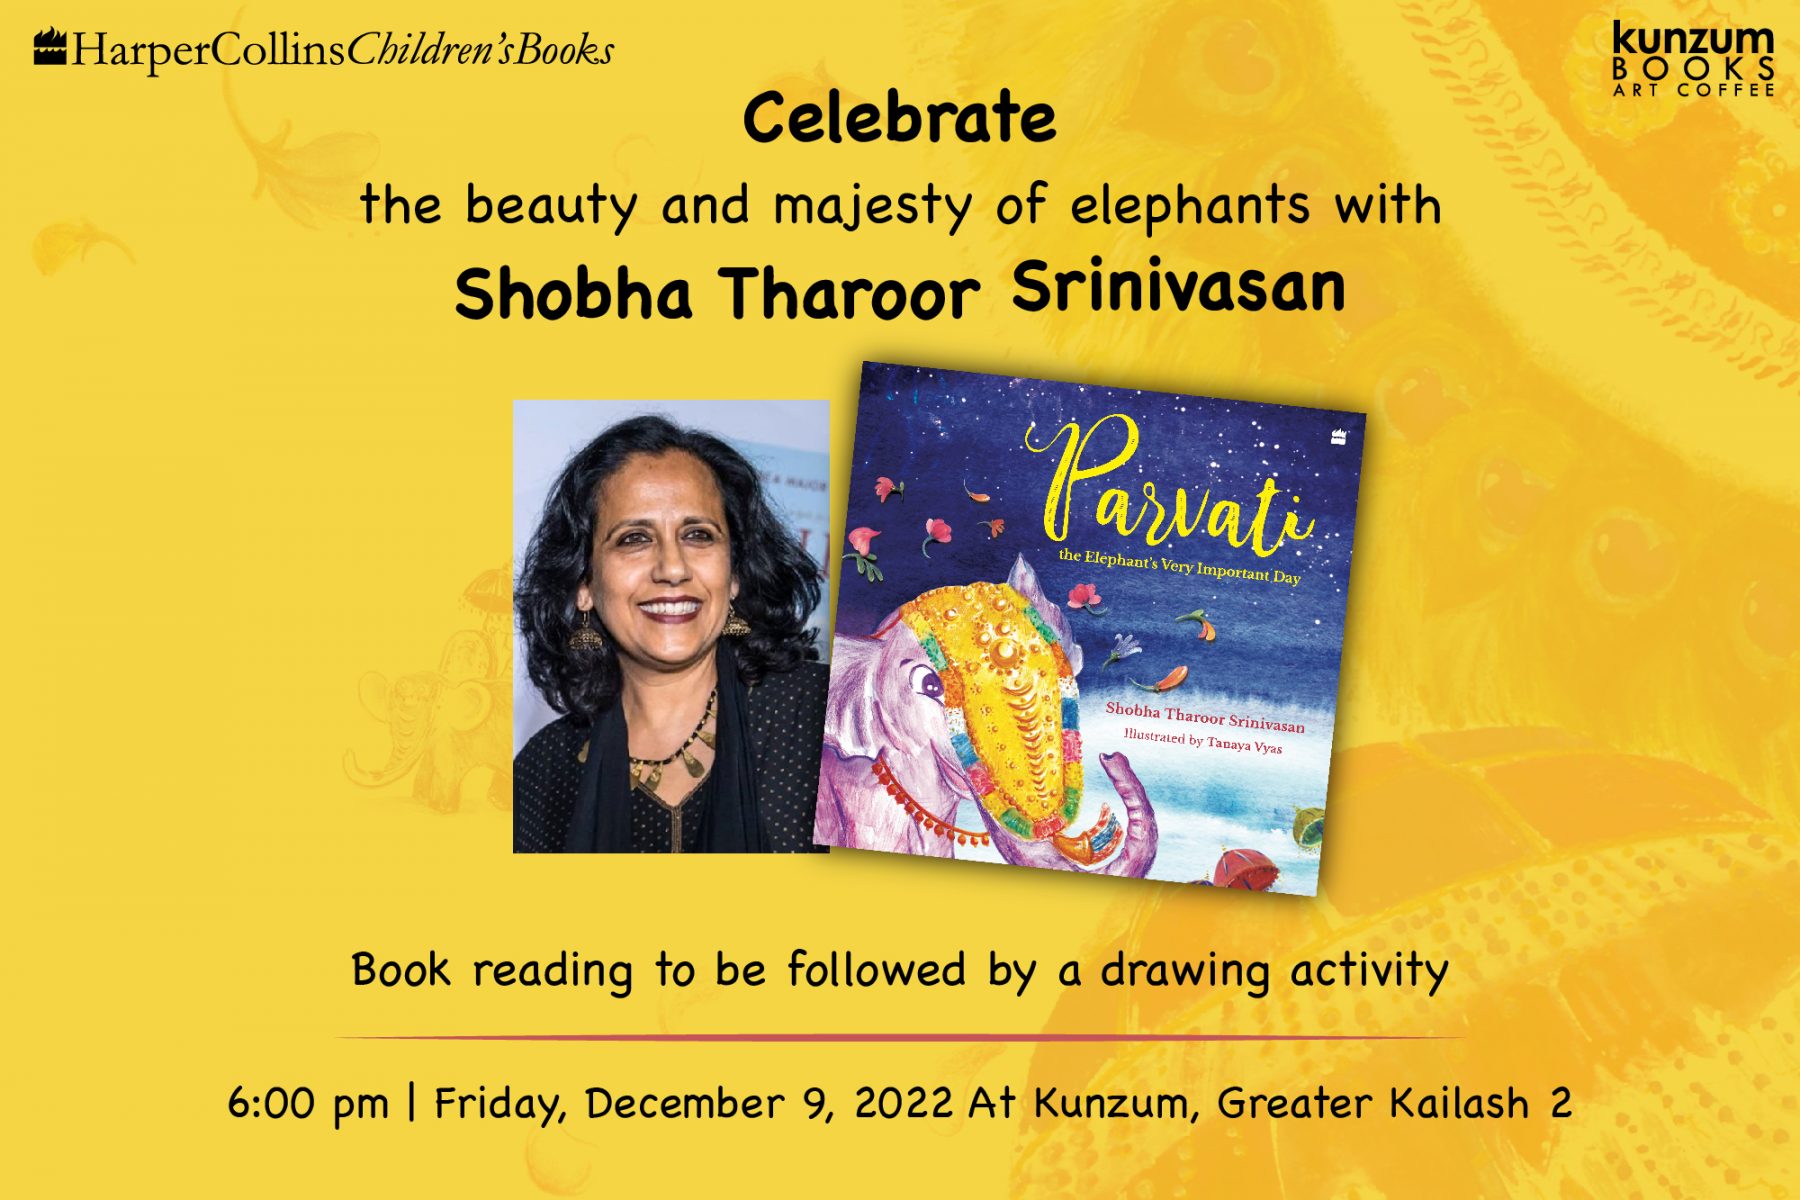 Join Us for a Book Reading and Drawing Session with Shobha Tharoor Srinivasan